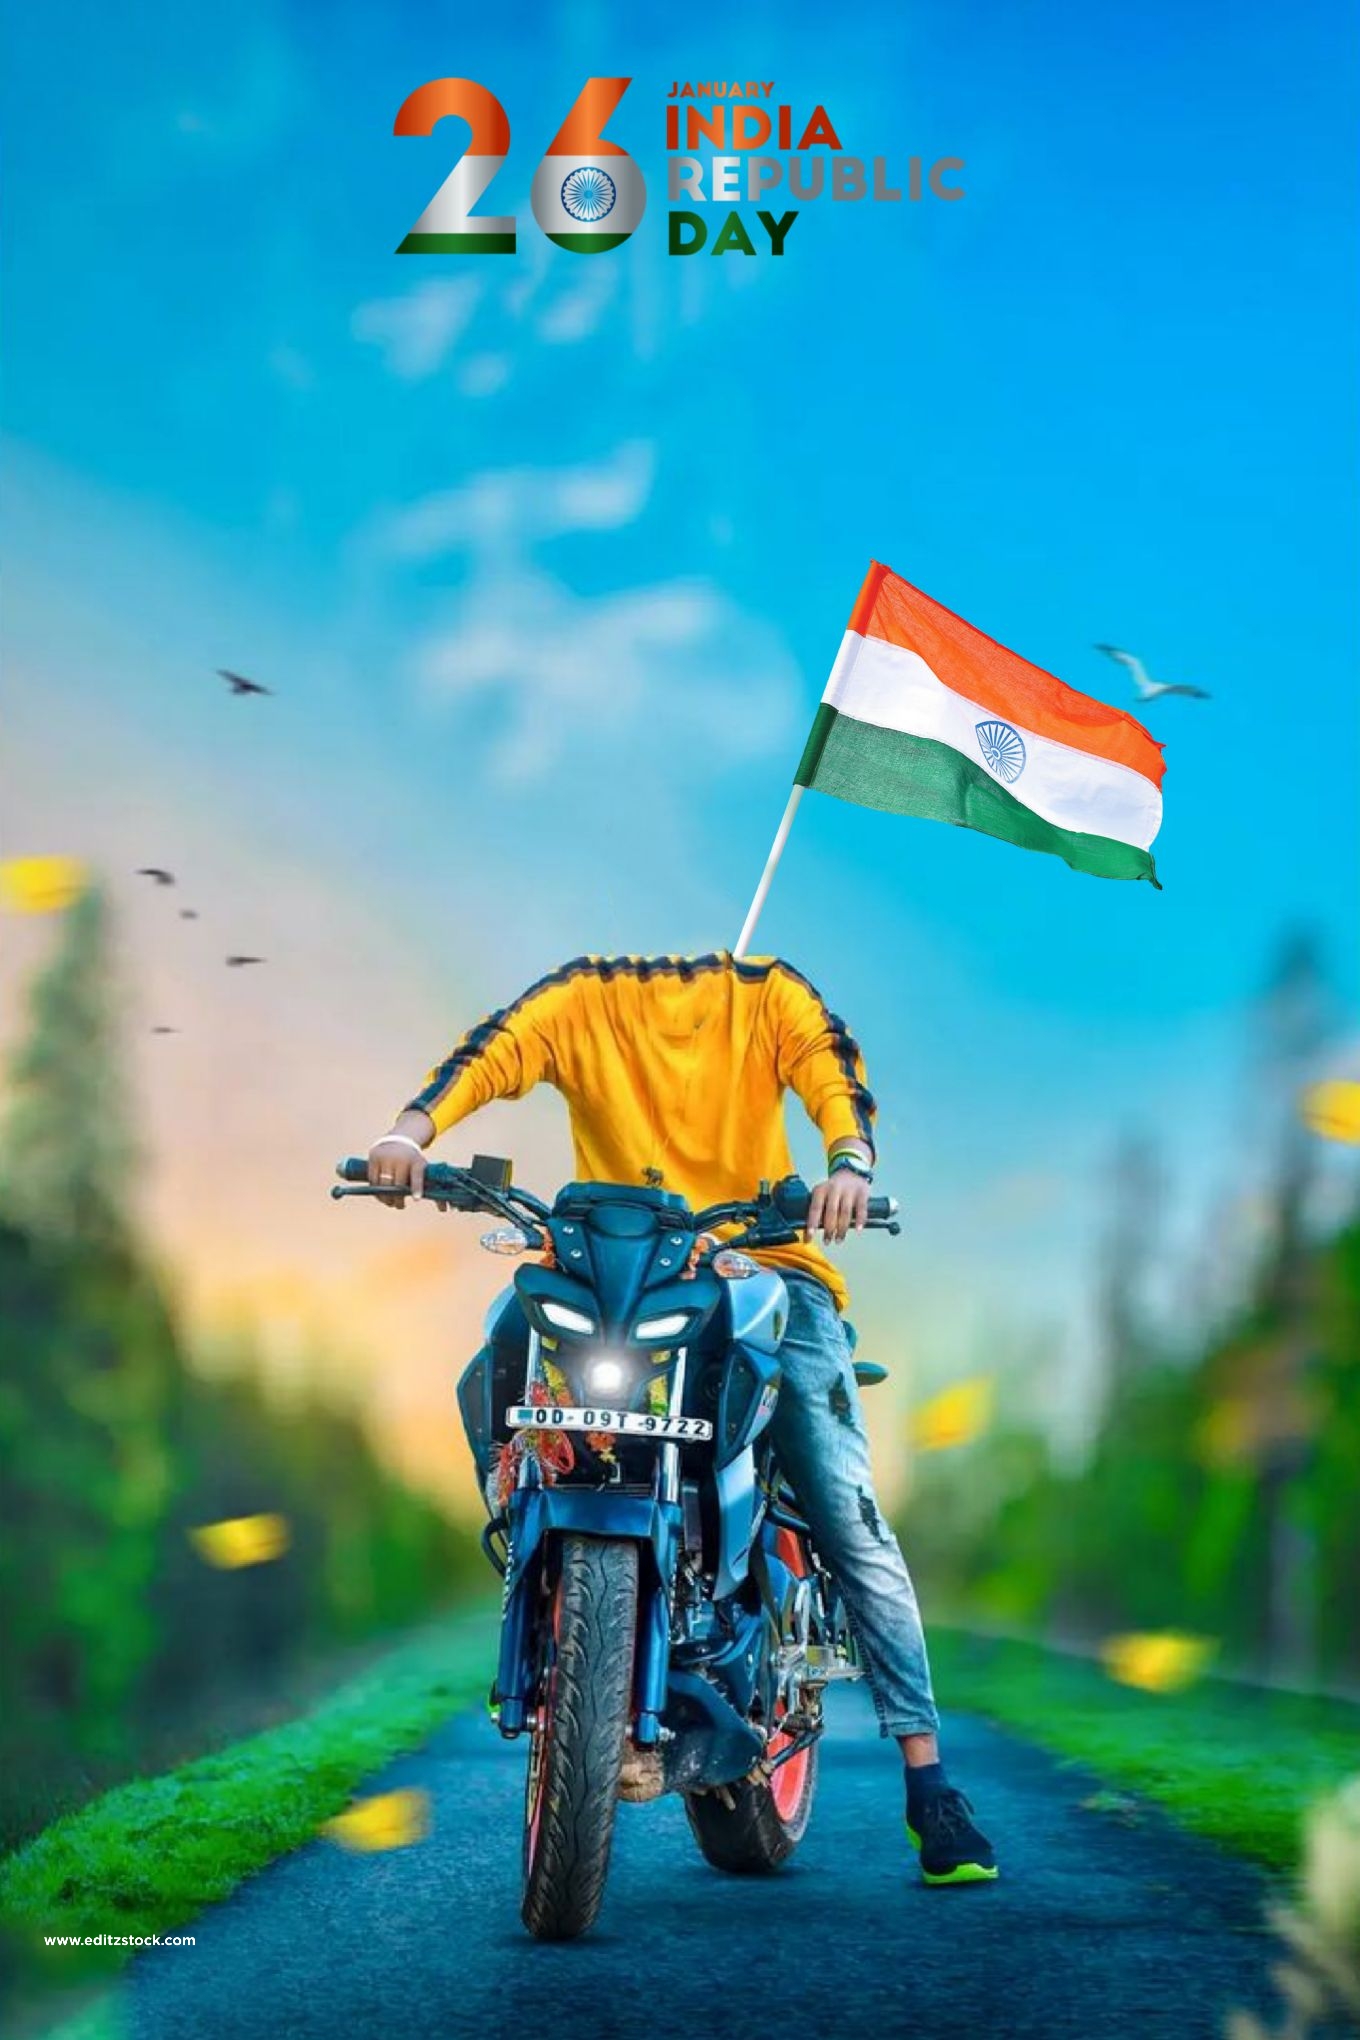 26 january cb background video for republic day 2022 with bike